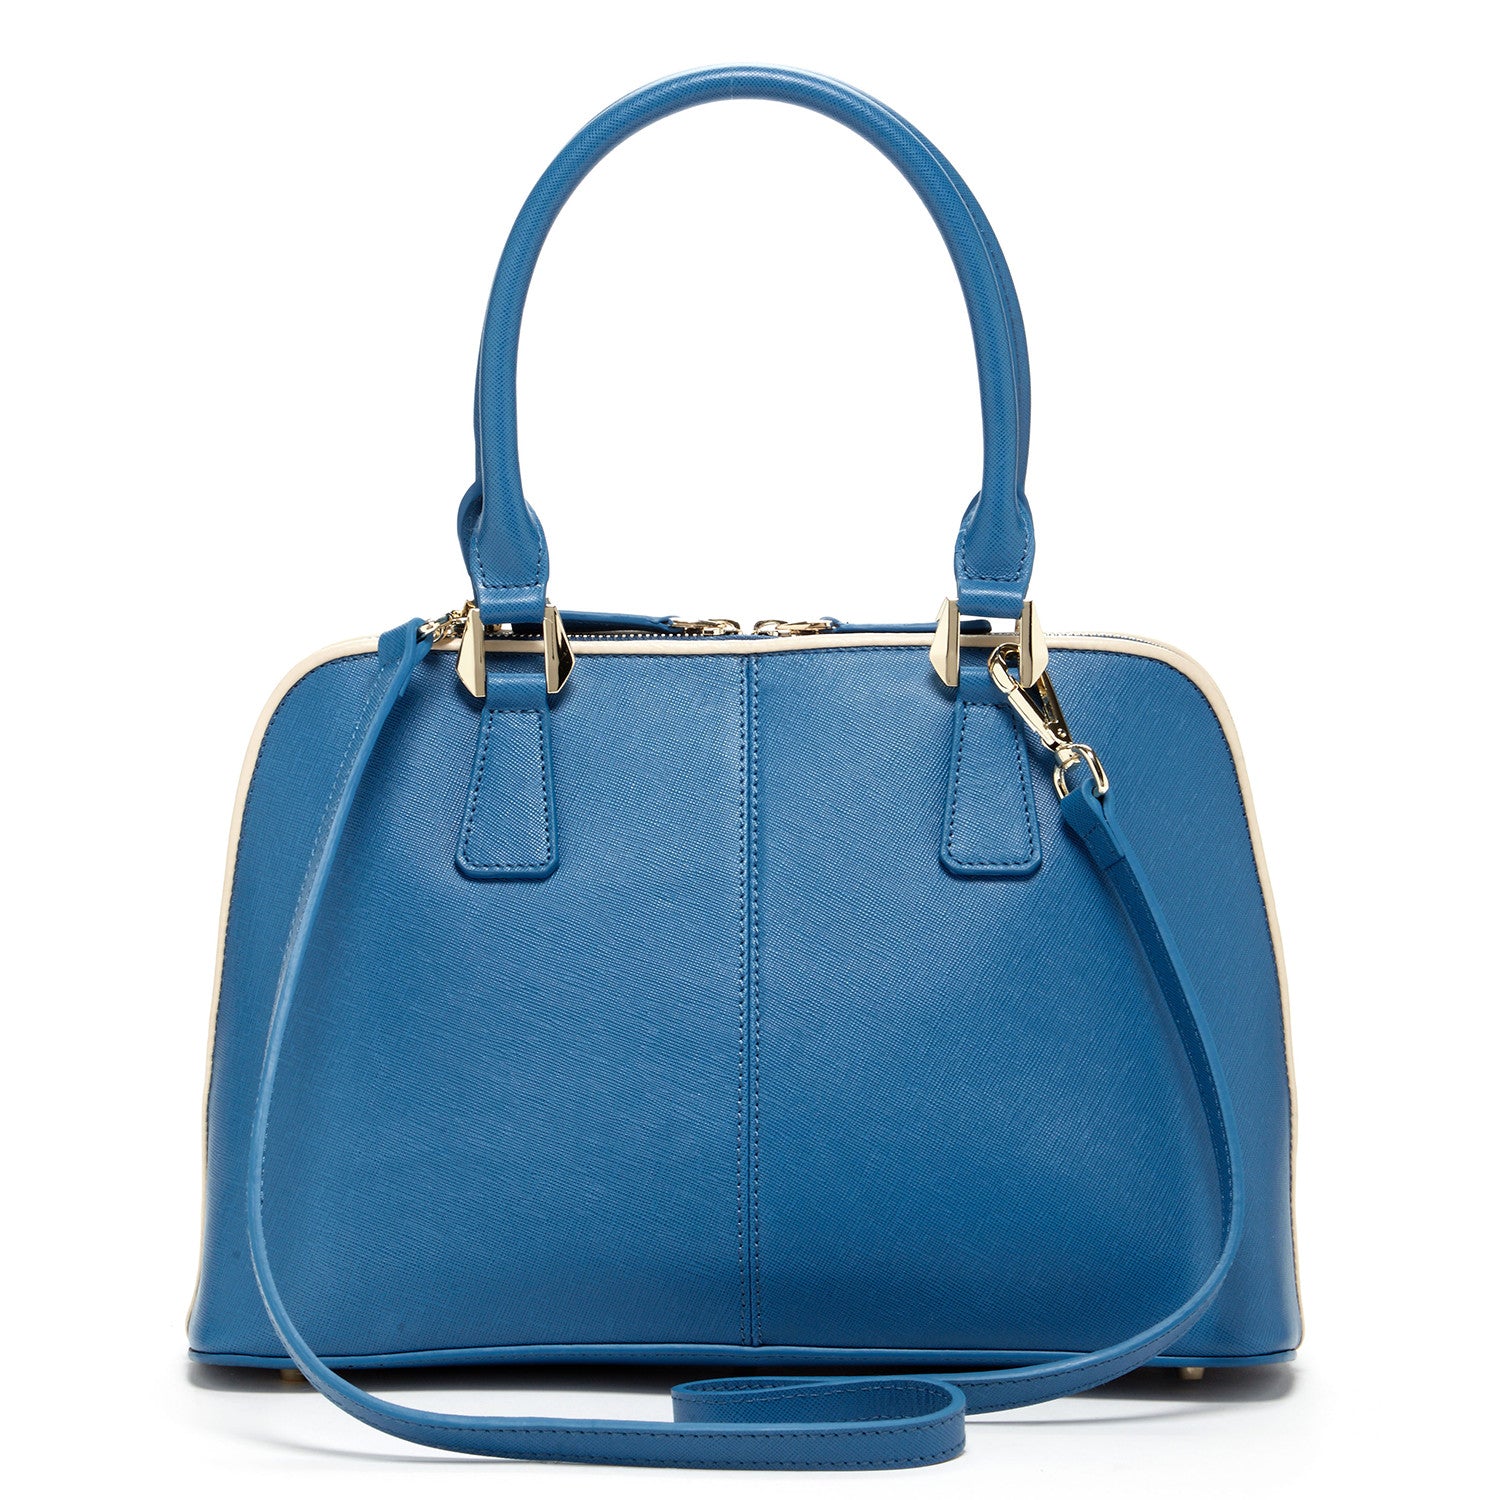  Introducing the Stylish and Timeless Melissa Blue Saffiano Leather Satchel Bag